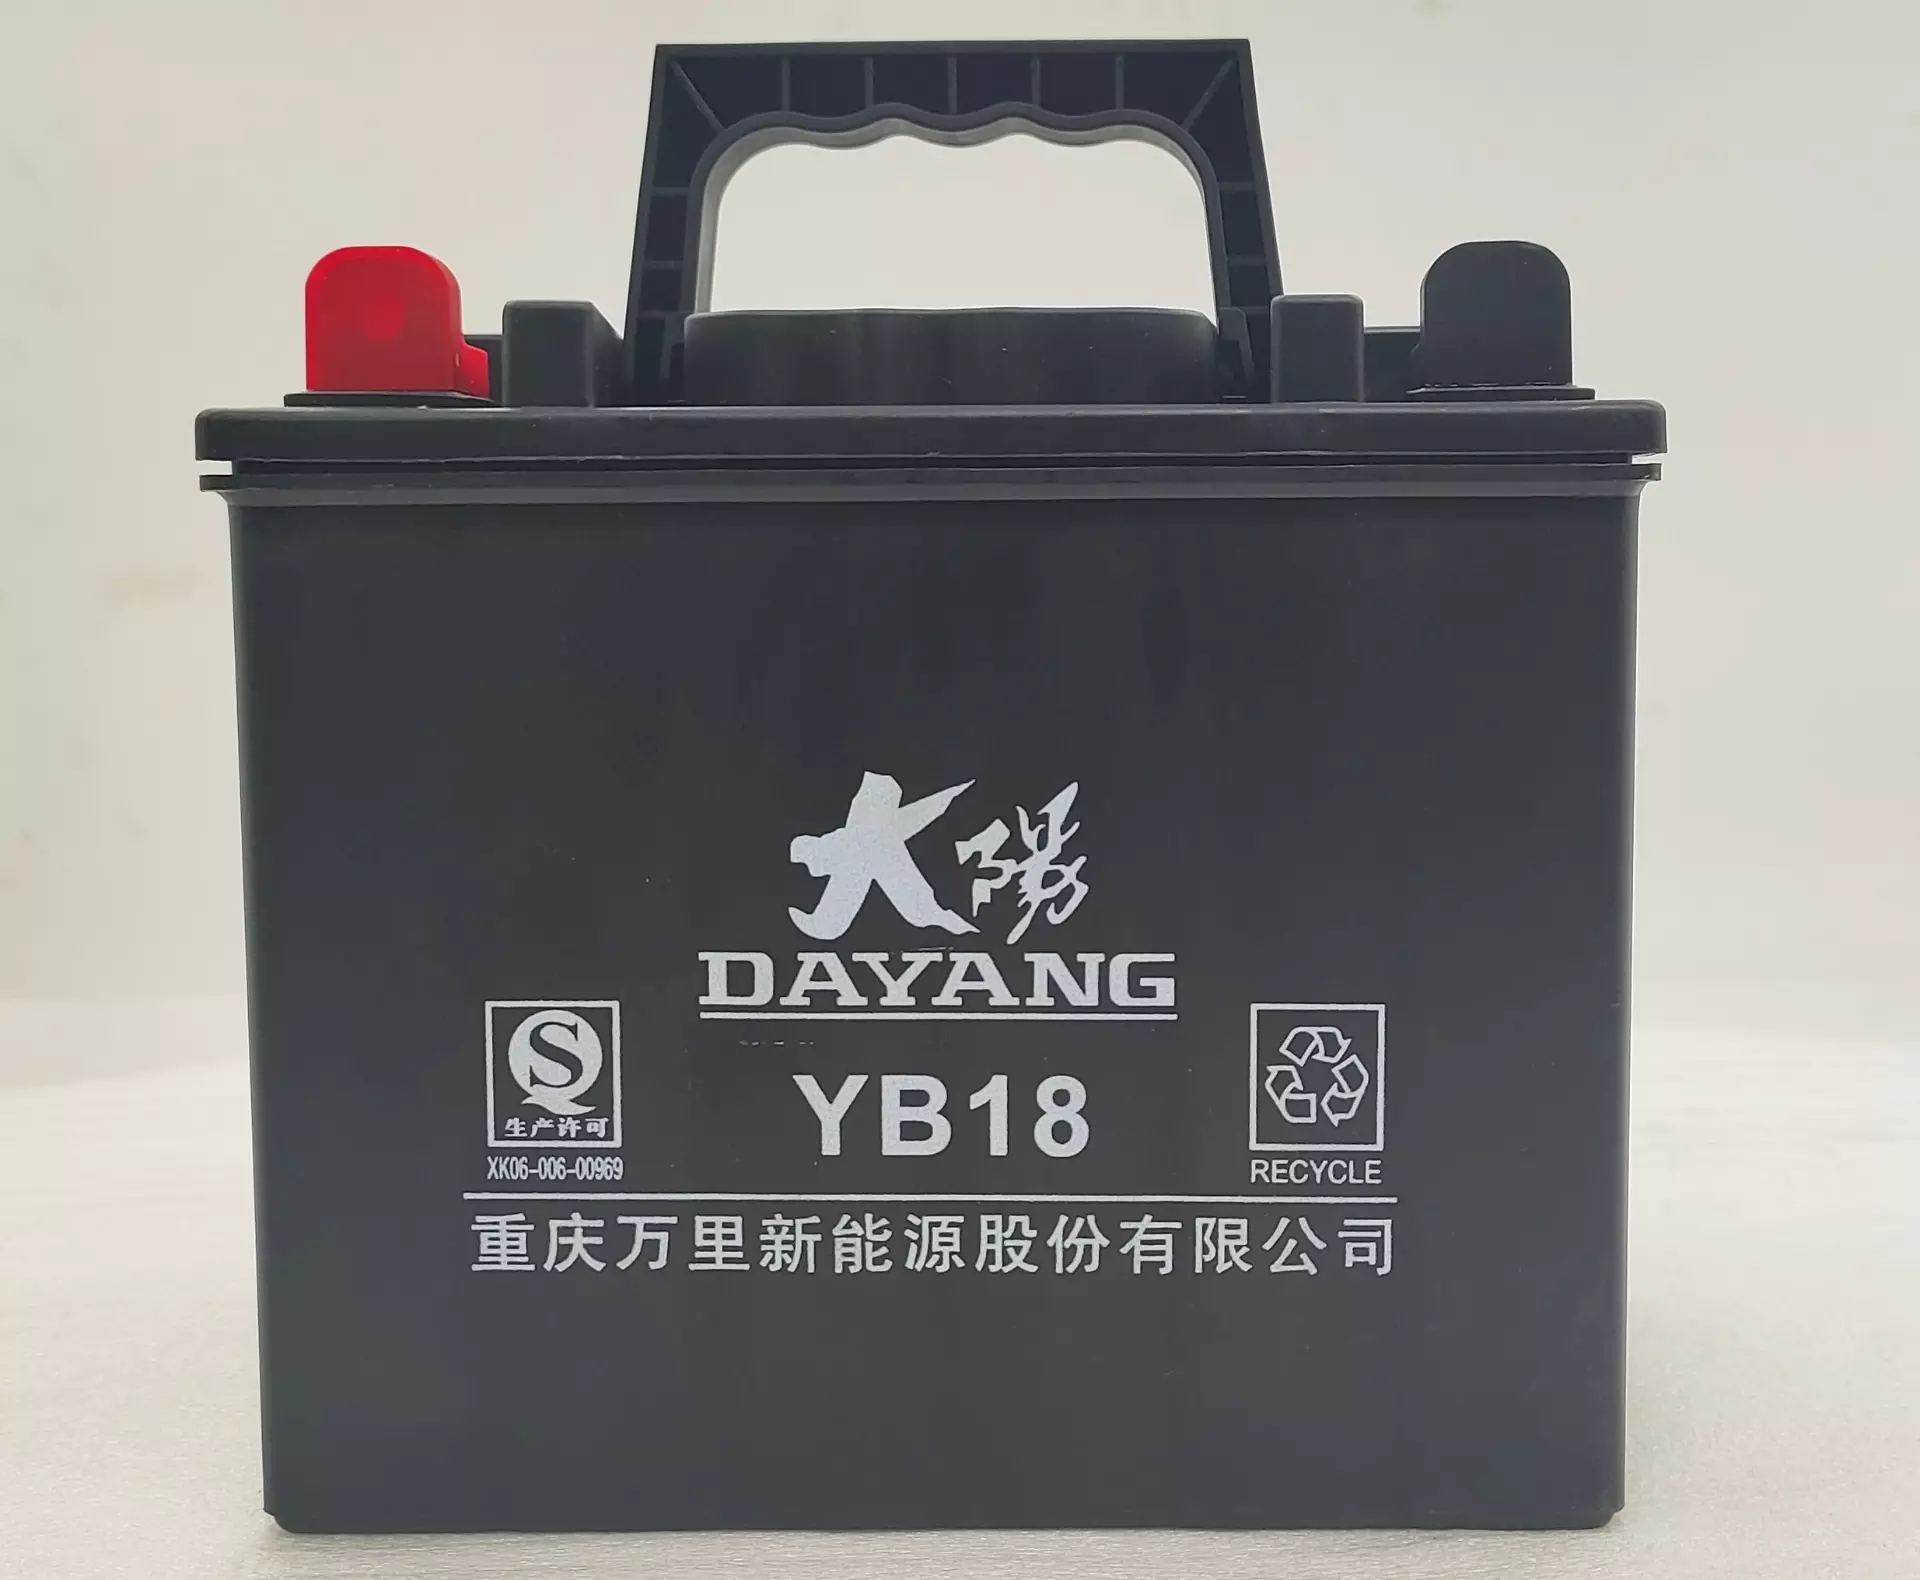 DAYANG factory direct sale tricycle parts new energy Removable   18A  Battery  WANLI motorcycle  high quality  made in China